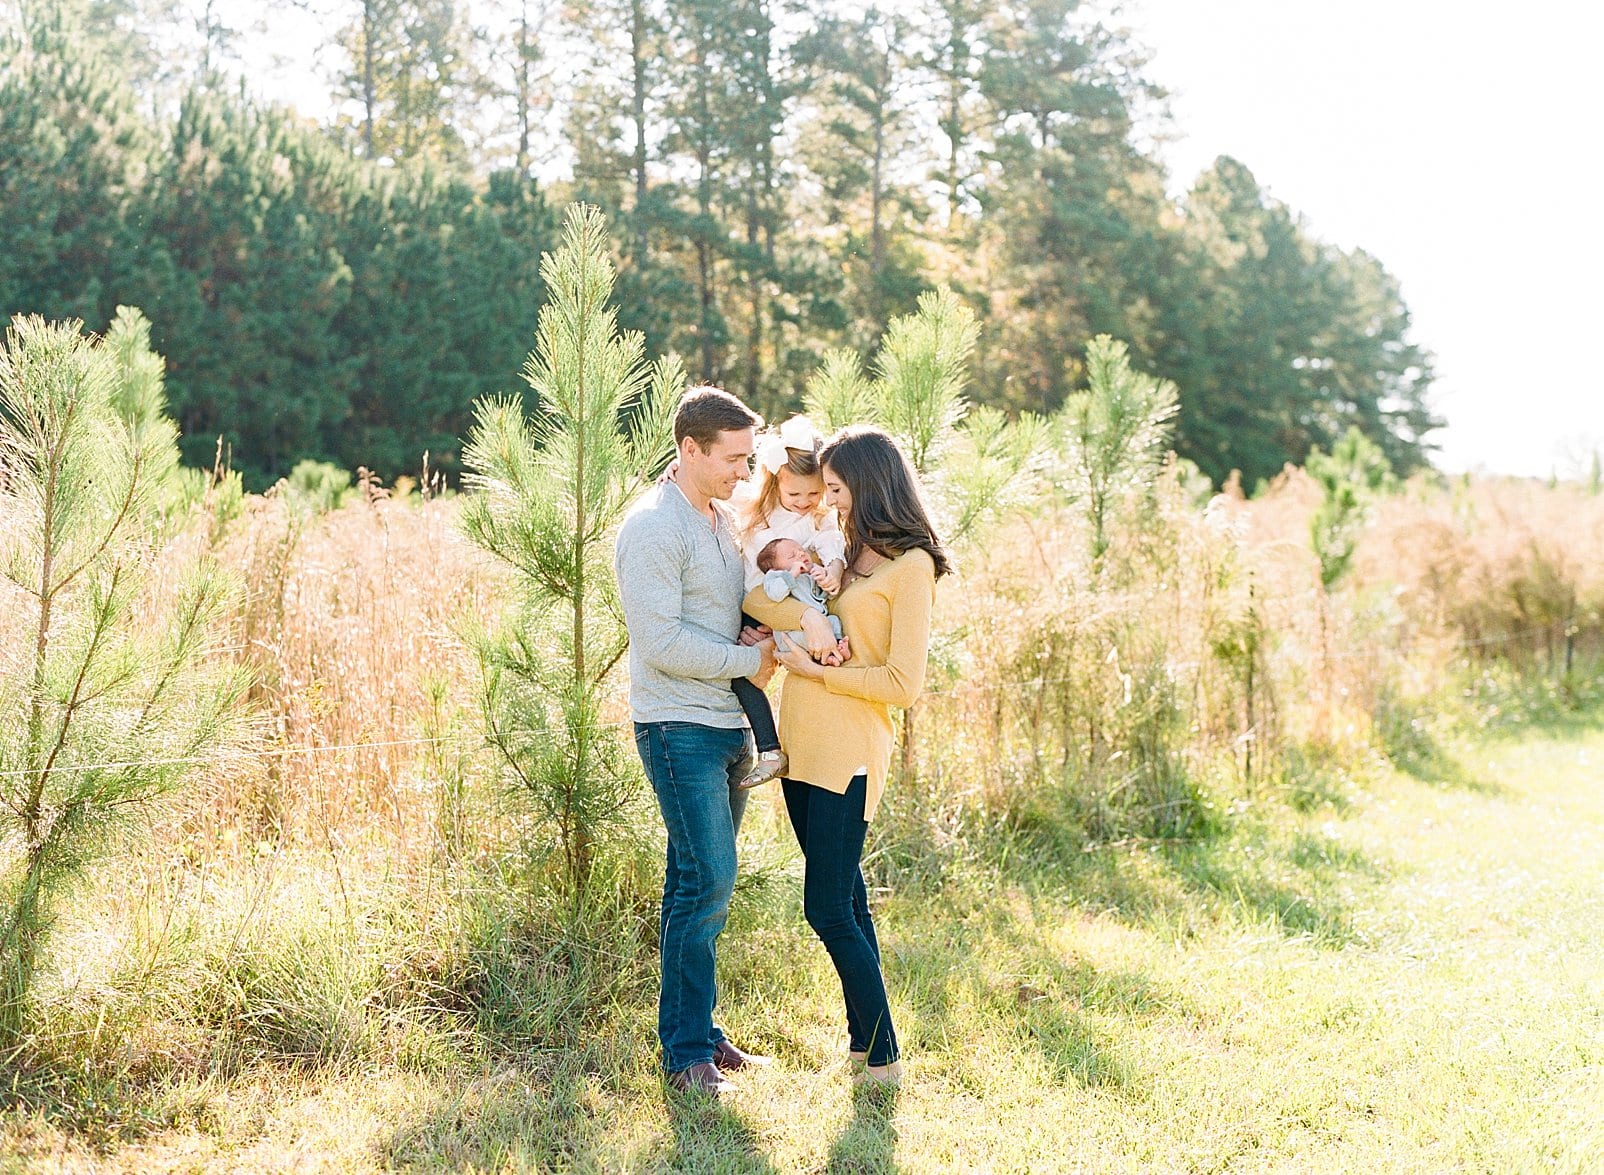 Raleigh film family newborn session outside in front of a pine tree field photo